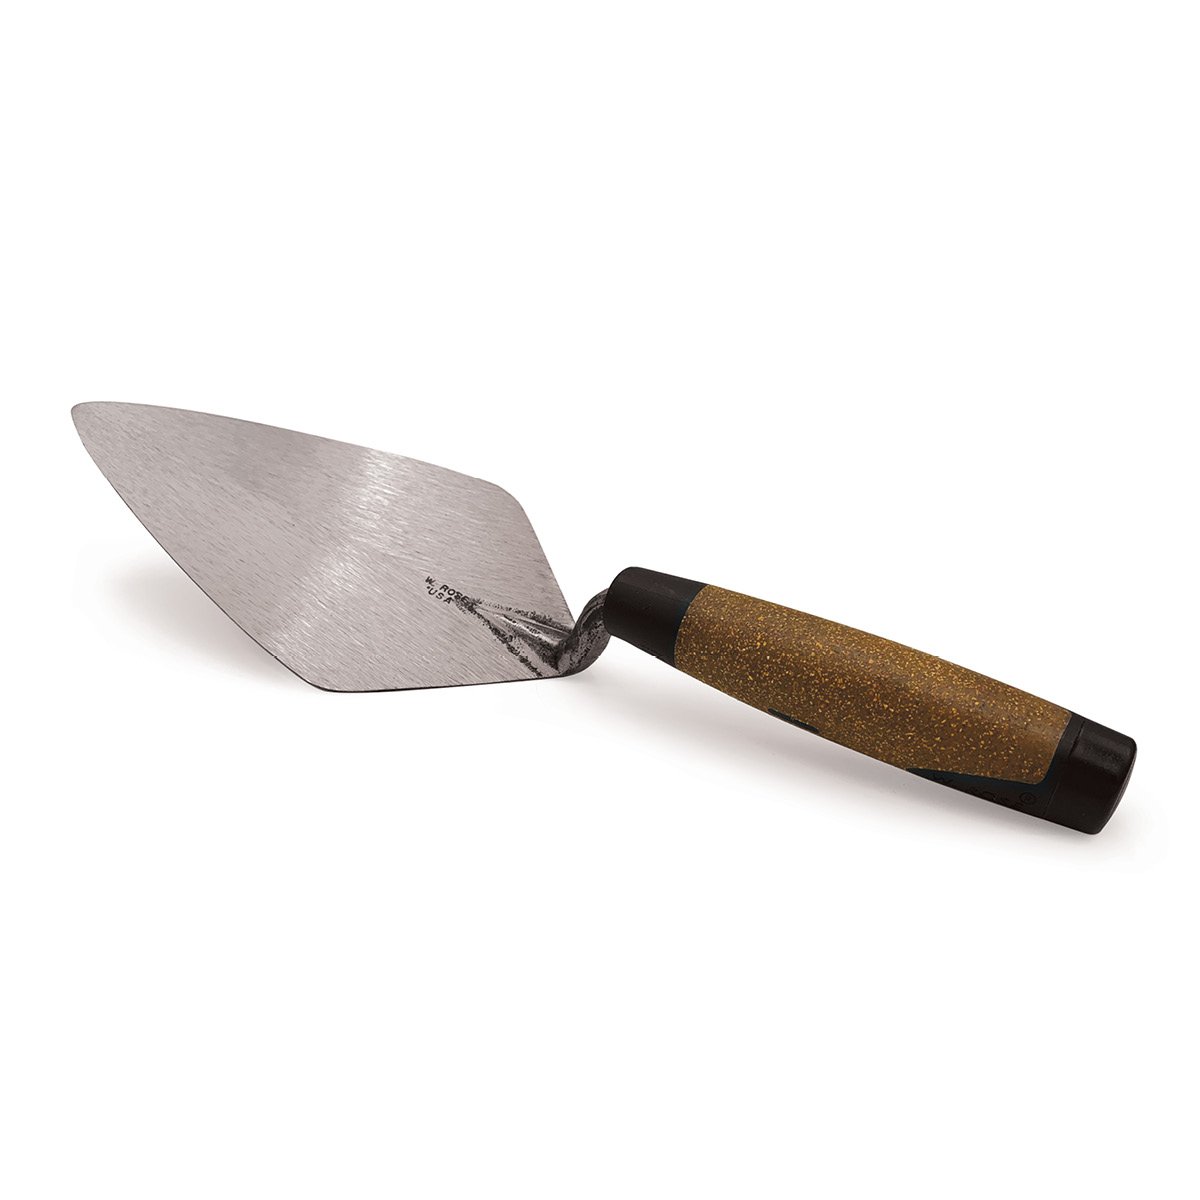 W.rose narrow London pattern brick trowel with cork material handle, Available from Speedcrete, United Kingdom.